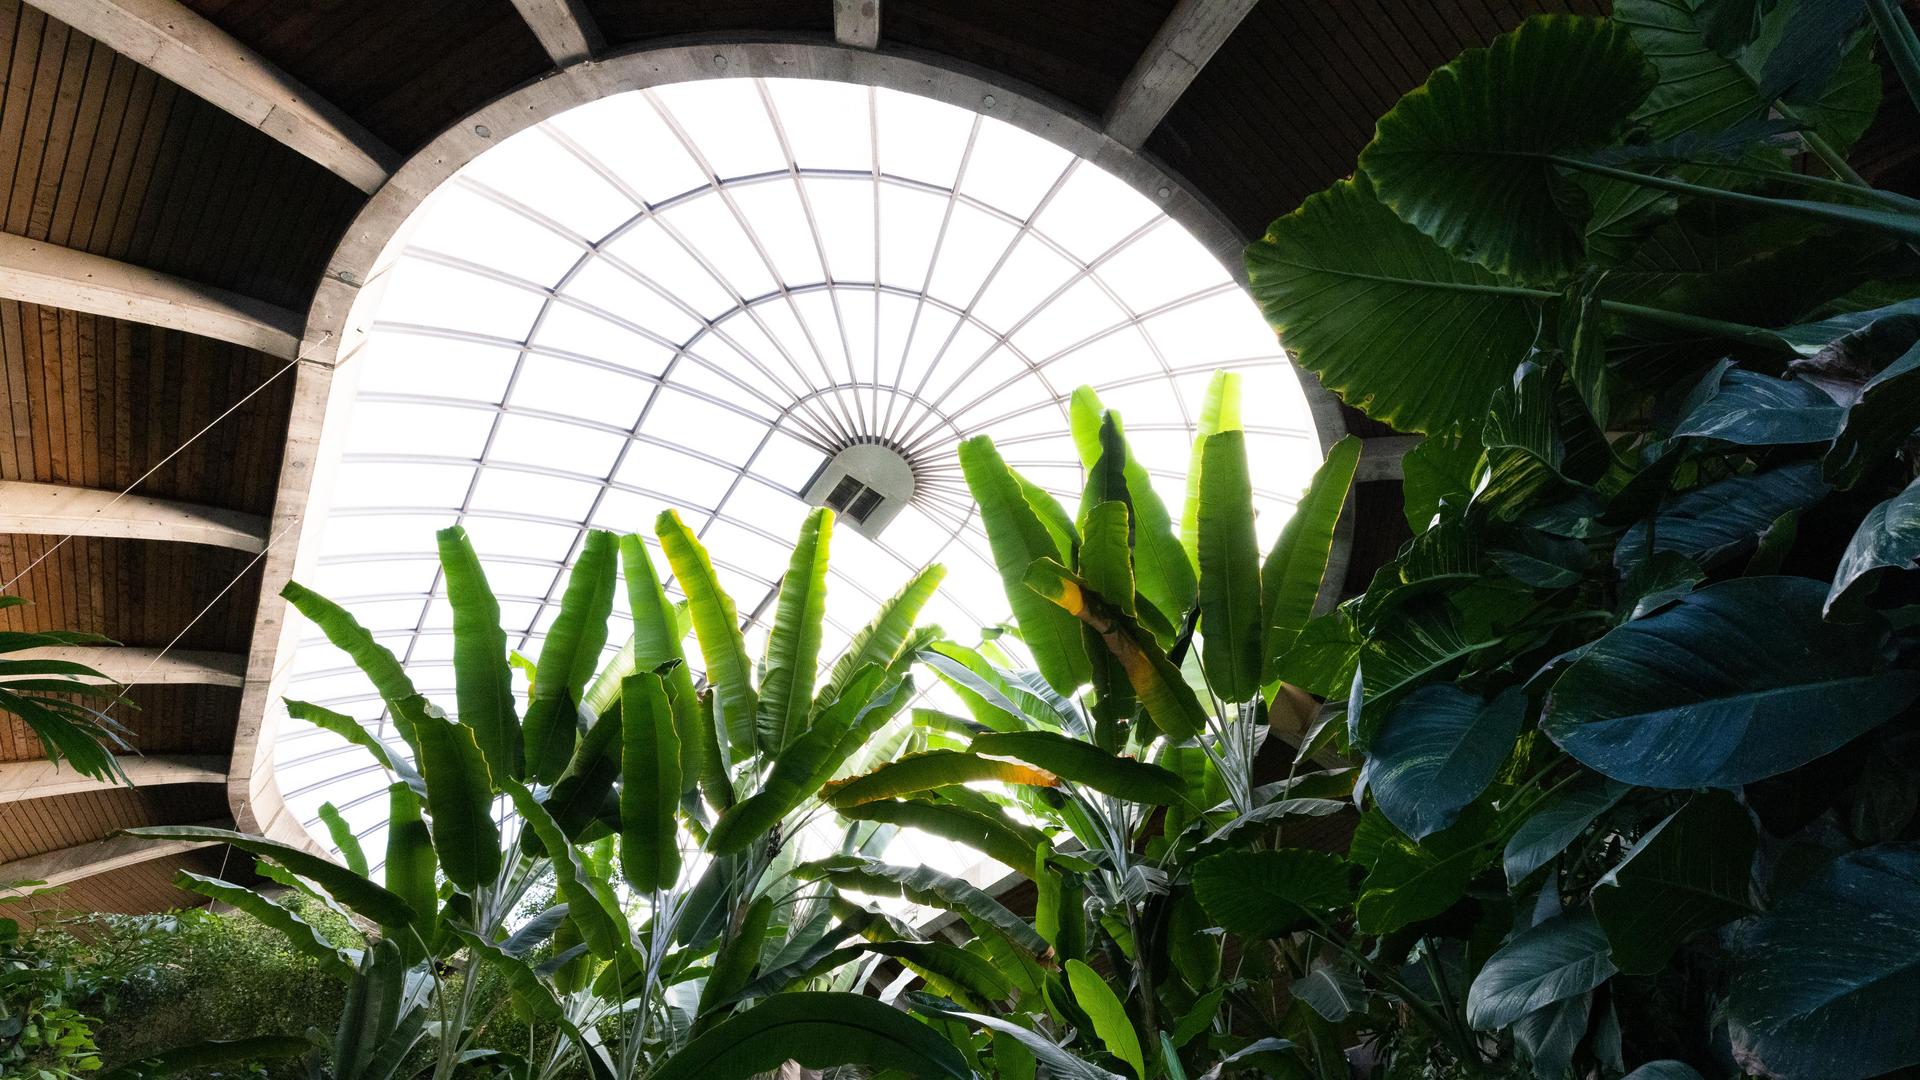 Looking up at the roof of Toucan Ridge, plant life and windows